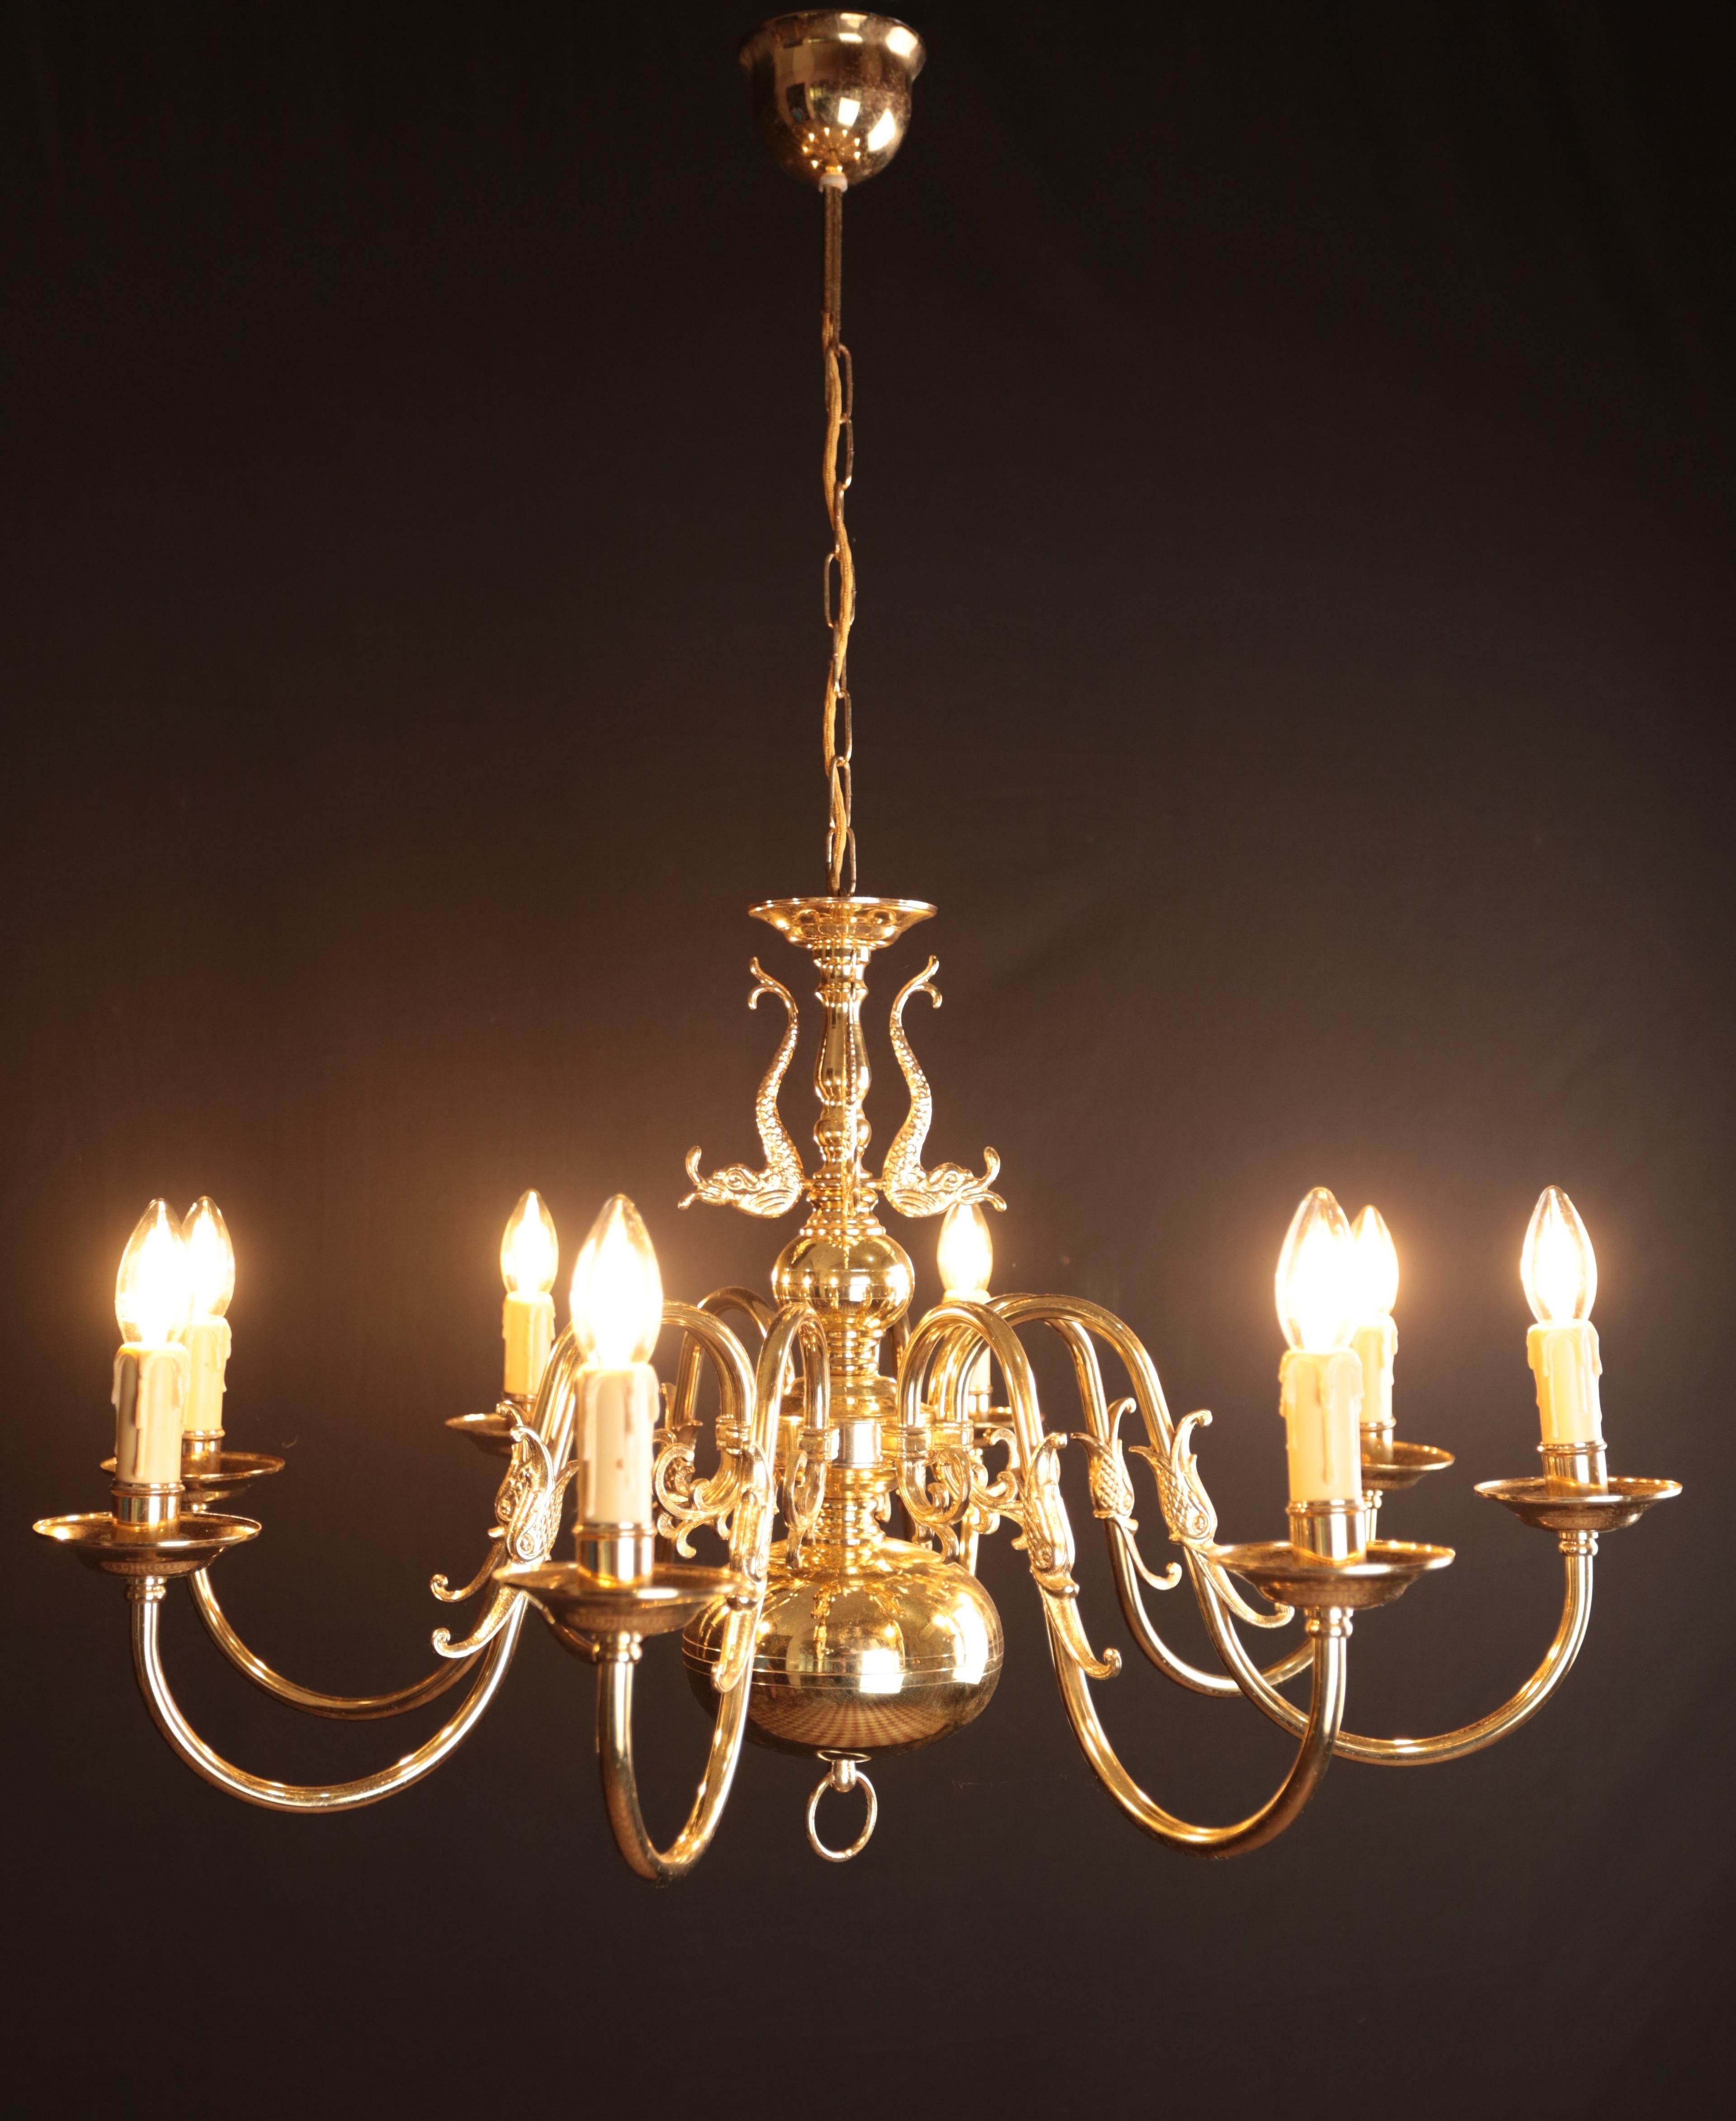 Eight-armed Flemish chandelier. Functional

A beautiful eight-arm Flemish chandelier made of polished brass. The upper part of the chandelier decorated with fish. The chandelier has a completely new copper wiring and new pods + new insides - ready